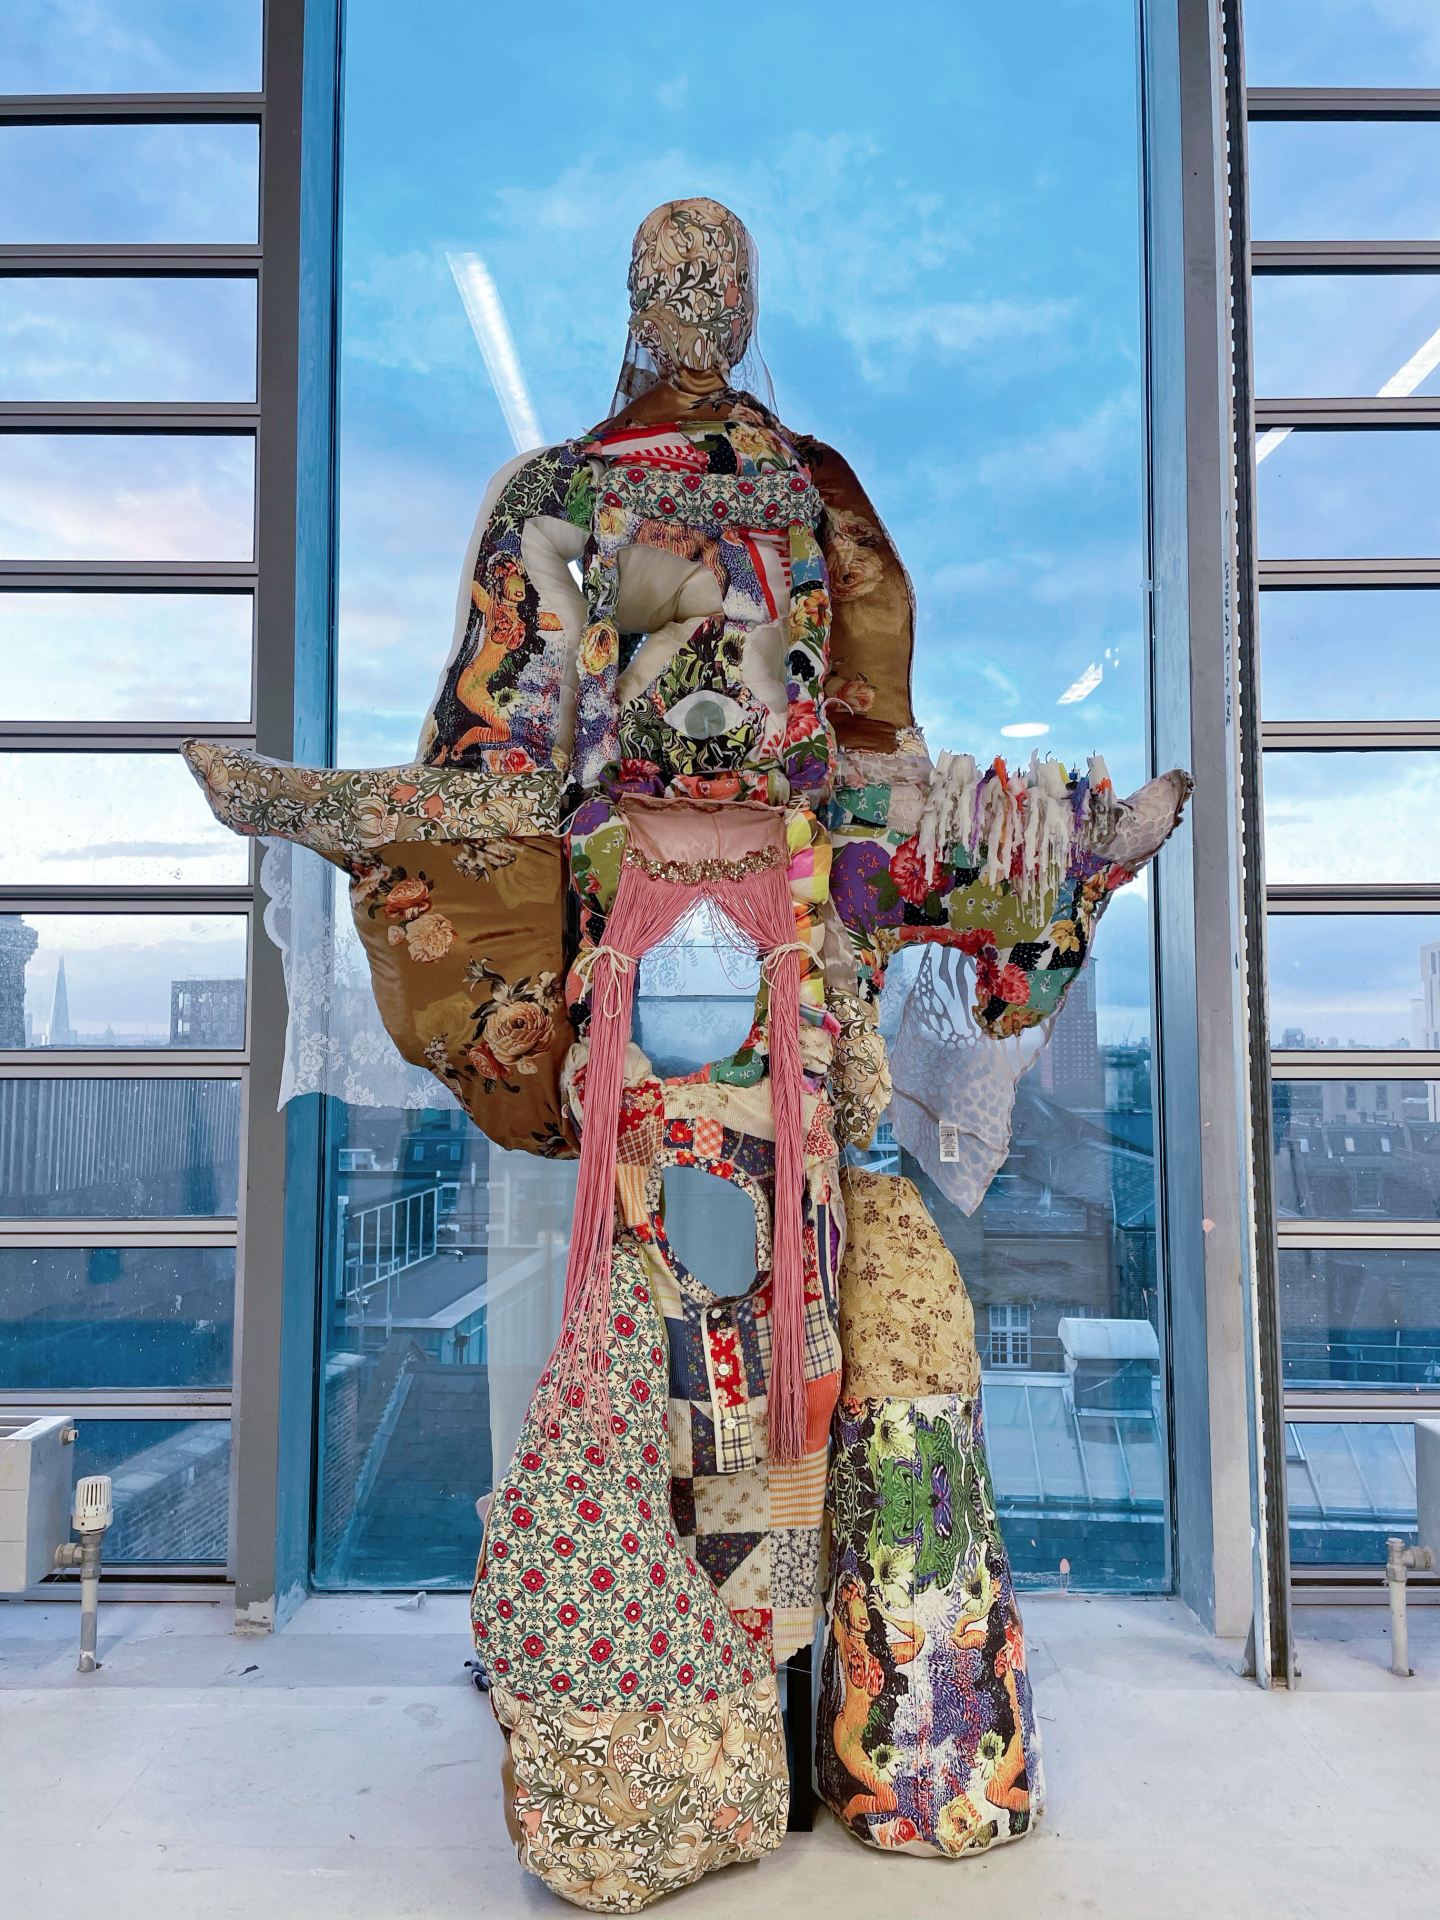 A fabric sculpture in the form of a god with a number of devices for wishing, such as wishing candles, wishing wells and shooting star launchers, against a cityscape seen through a window.